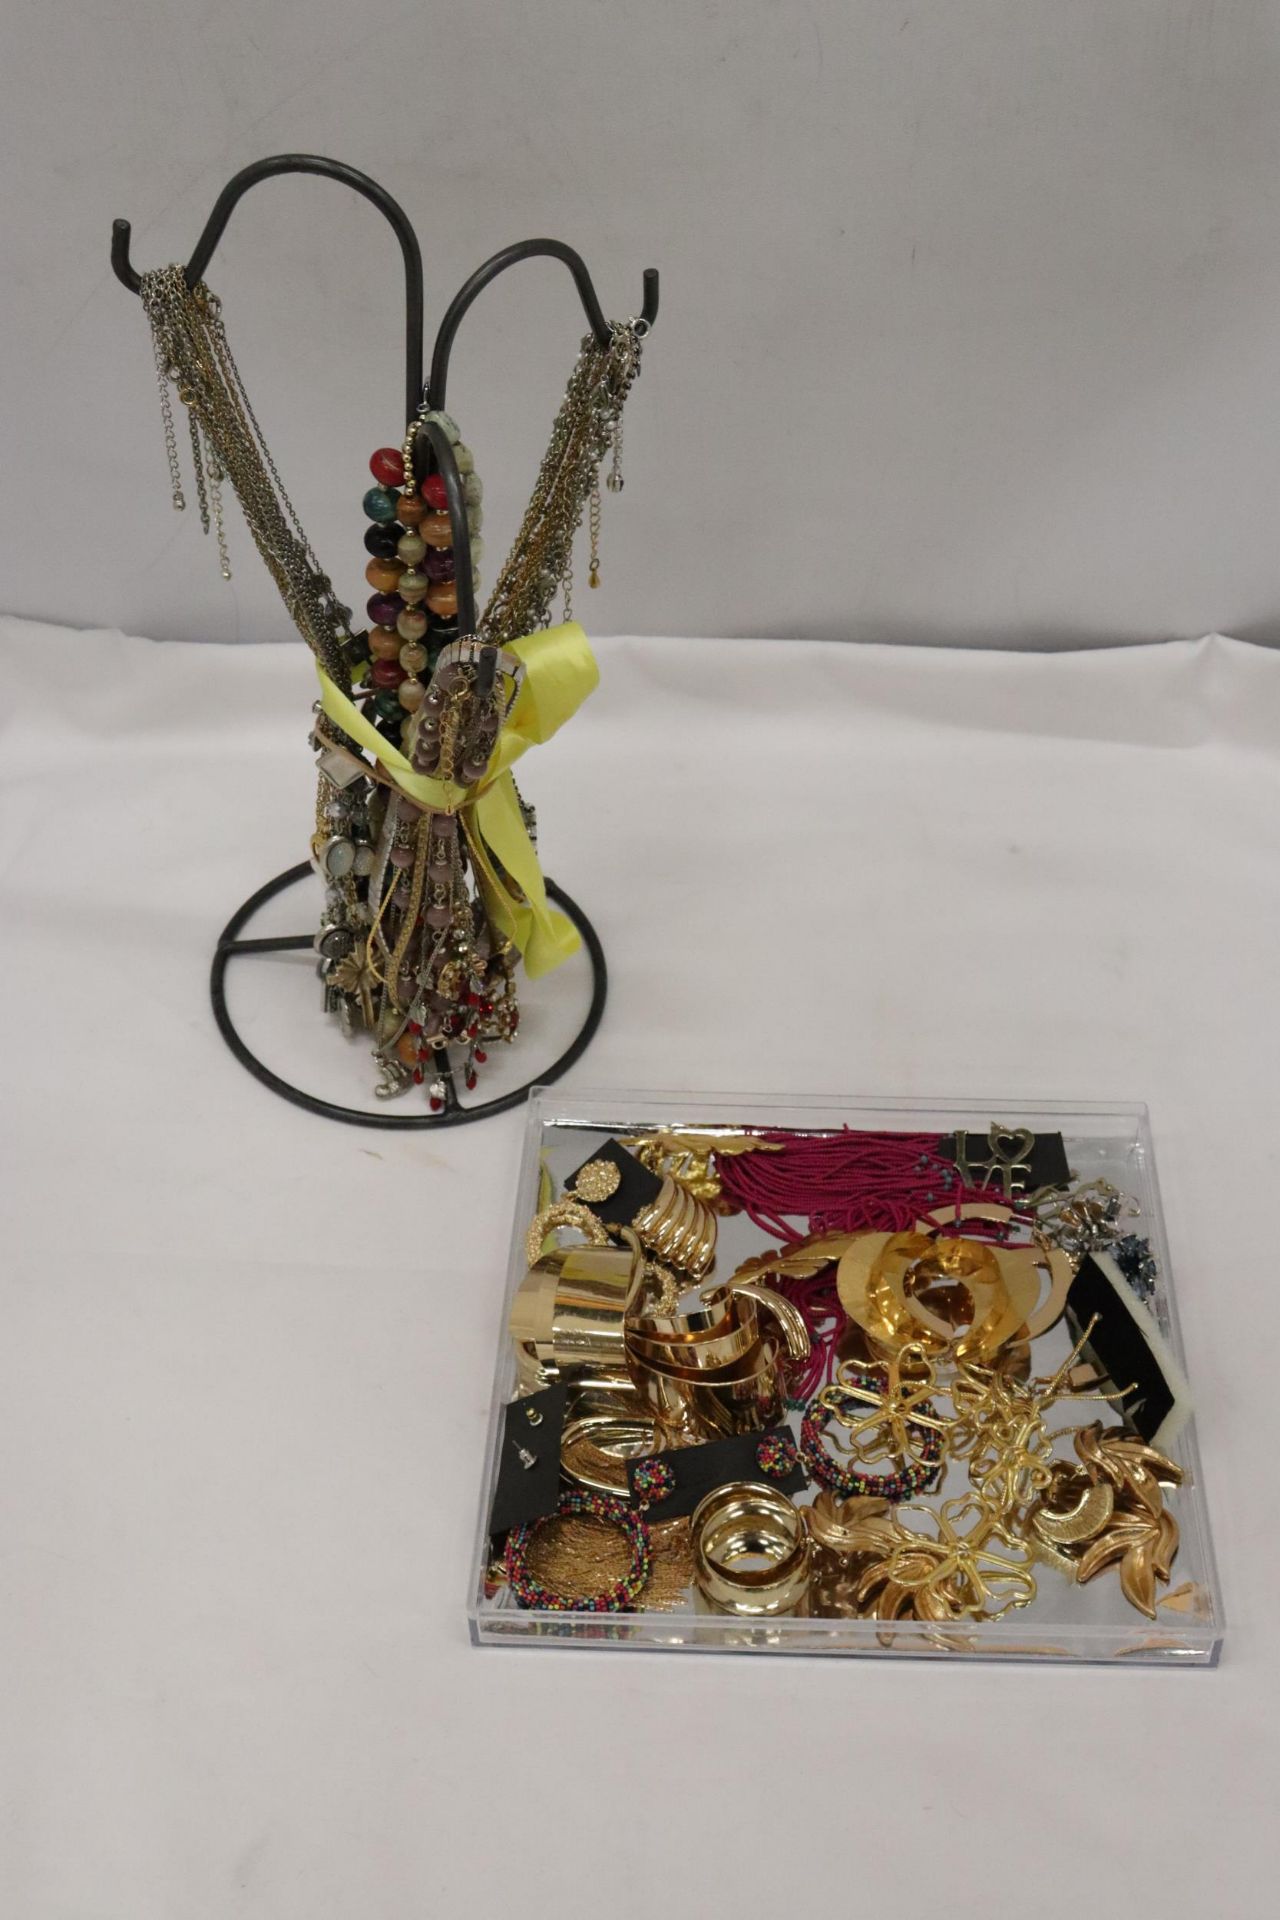 A JEWELLERY STAND WITH A QUANTITY OF NECKLACES PLUS A QUANTITY OF EARRINGS